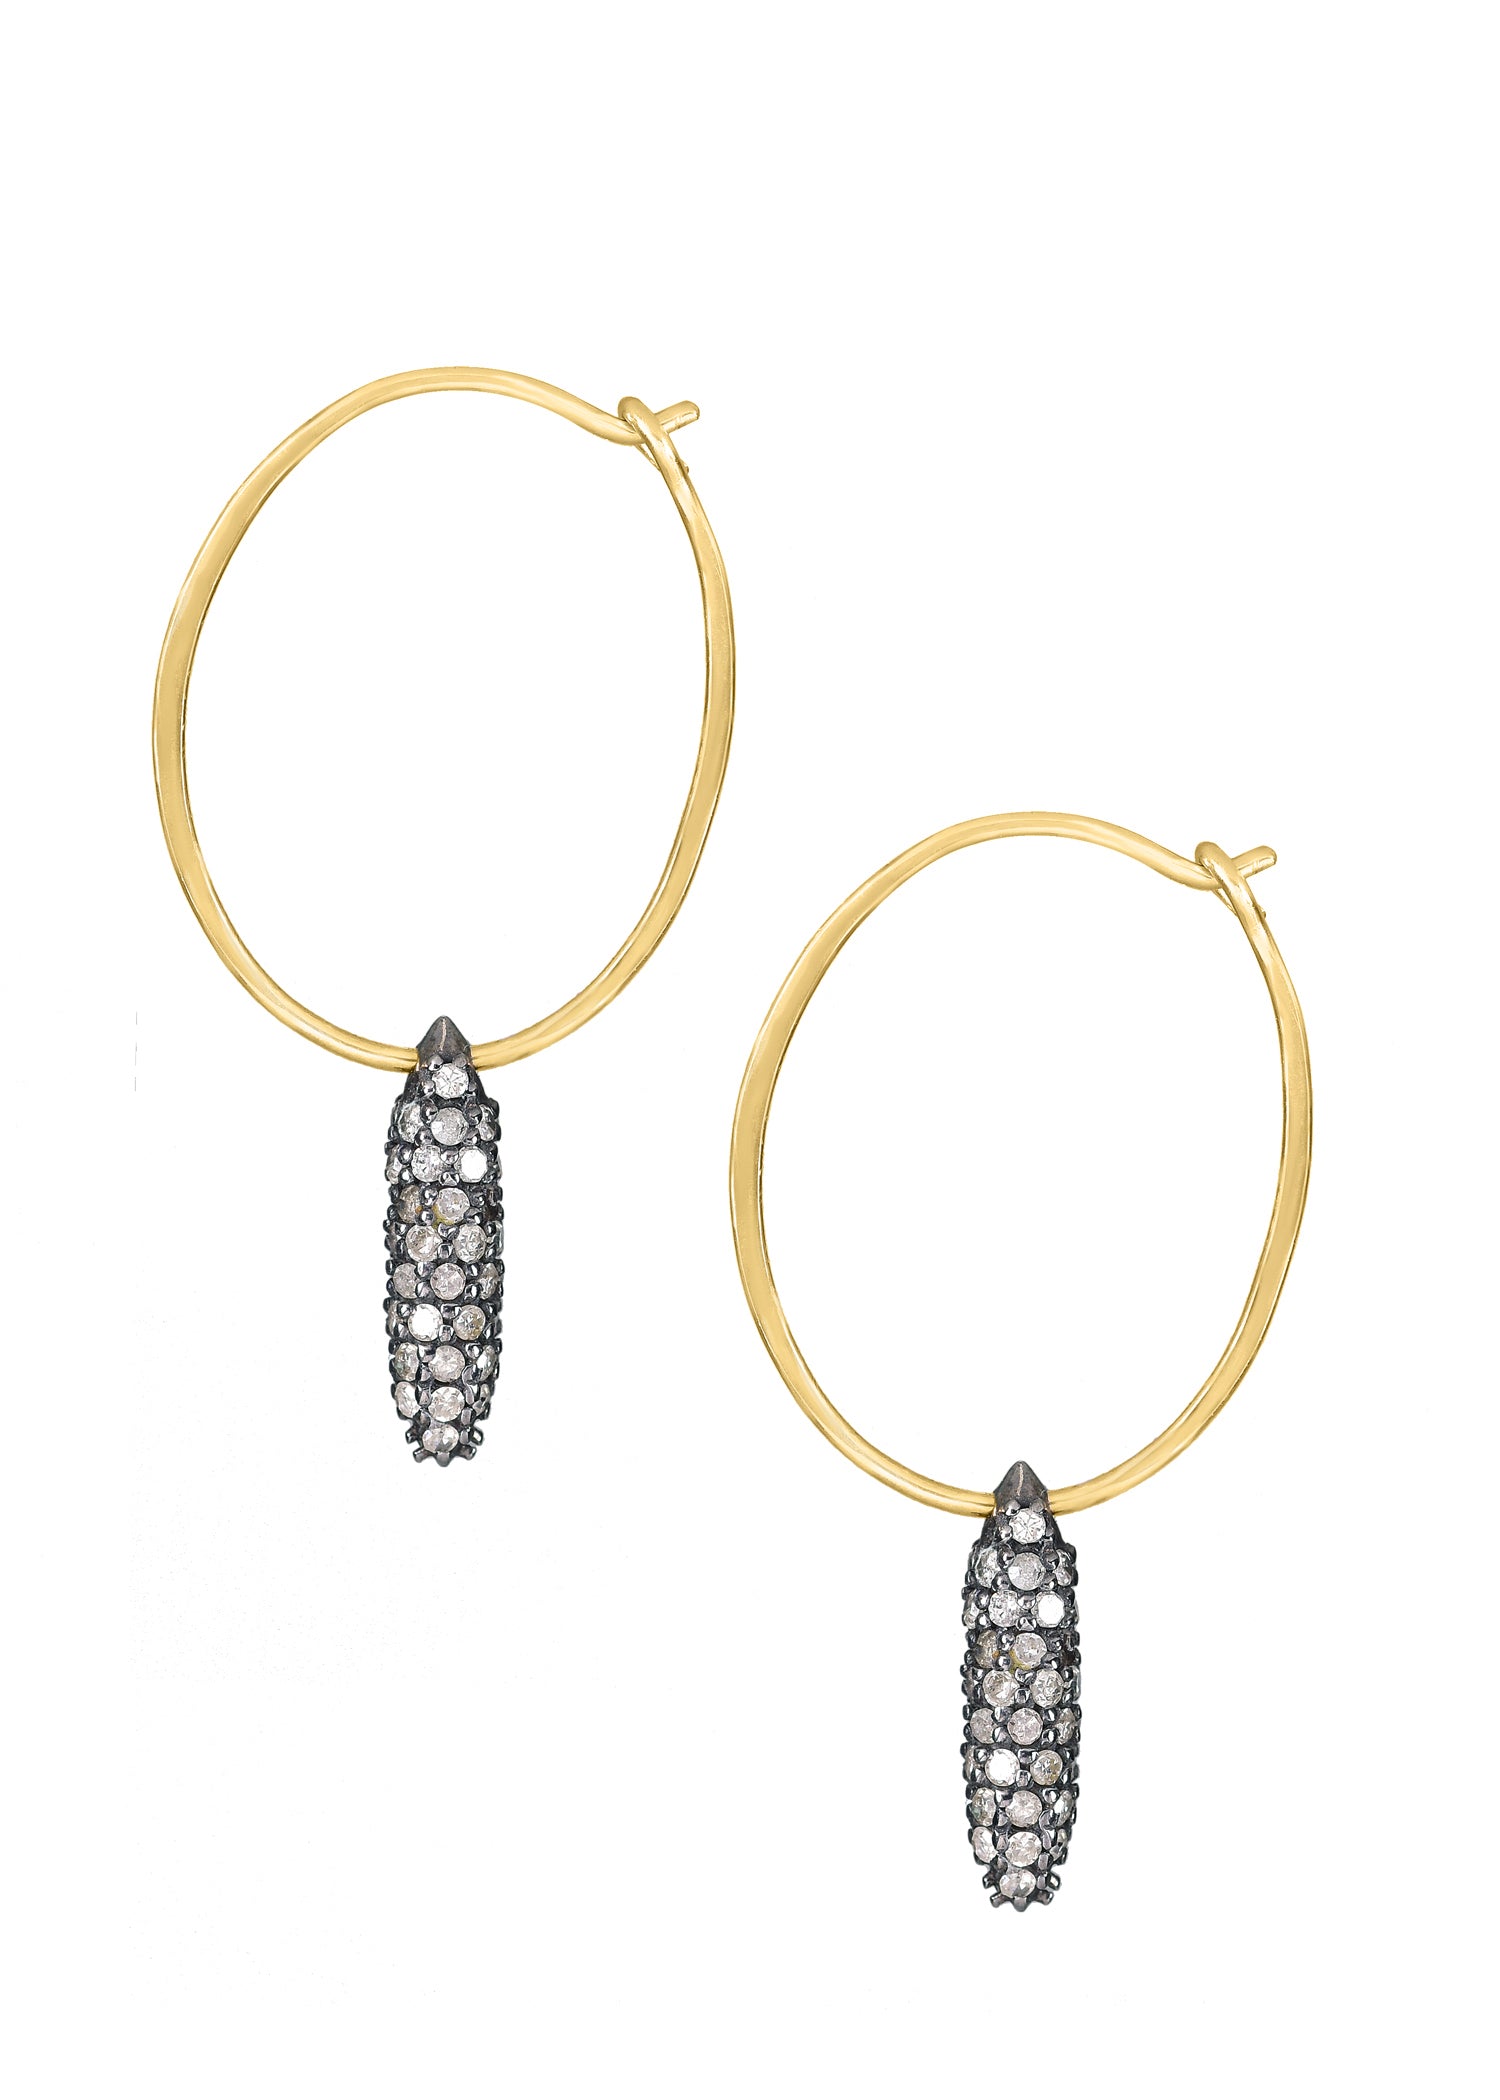 Diamond 14k gold Special order only Earrings measure 1-3/8" in length and 11/16" in width across the widest point of the hoop Handmade in our Los Angeles studio